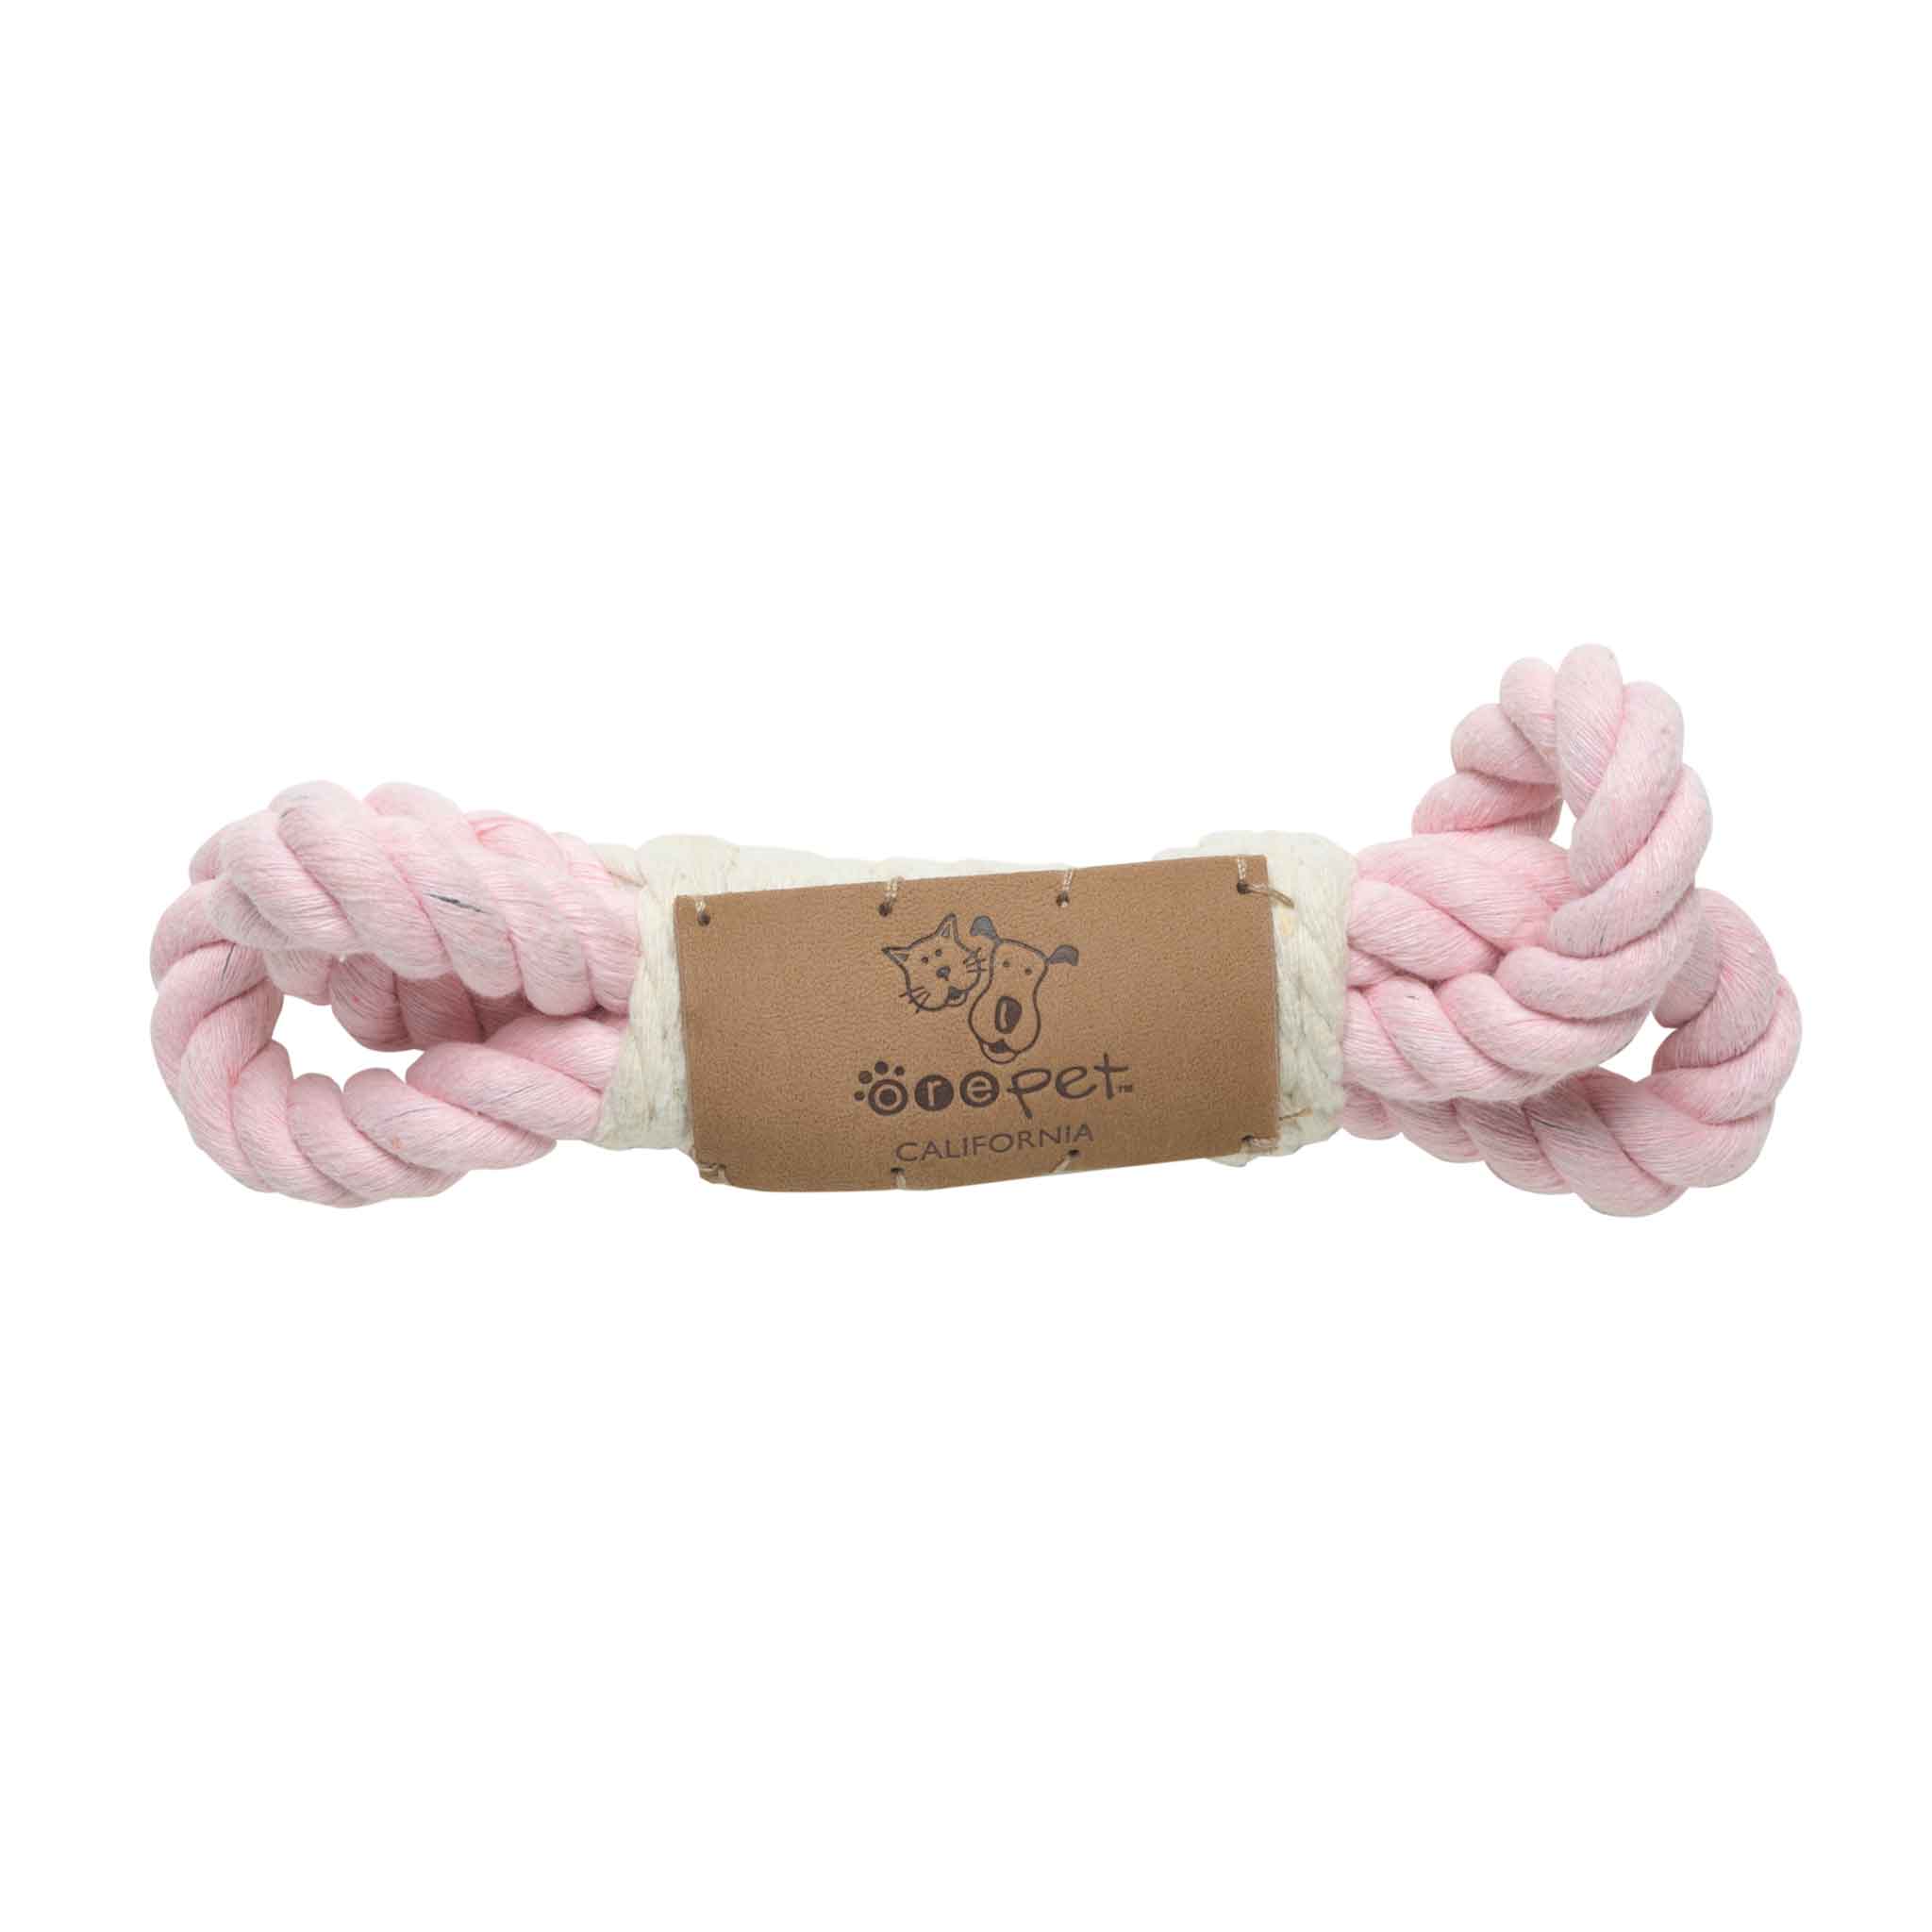 Speckle & Spot  by Ore’ Originals - Mini Loop Dog Toy | Pink Mist